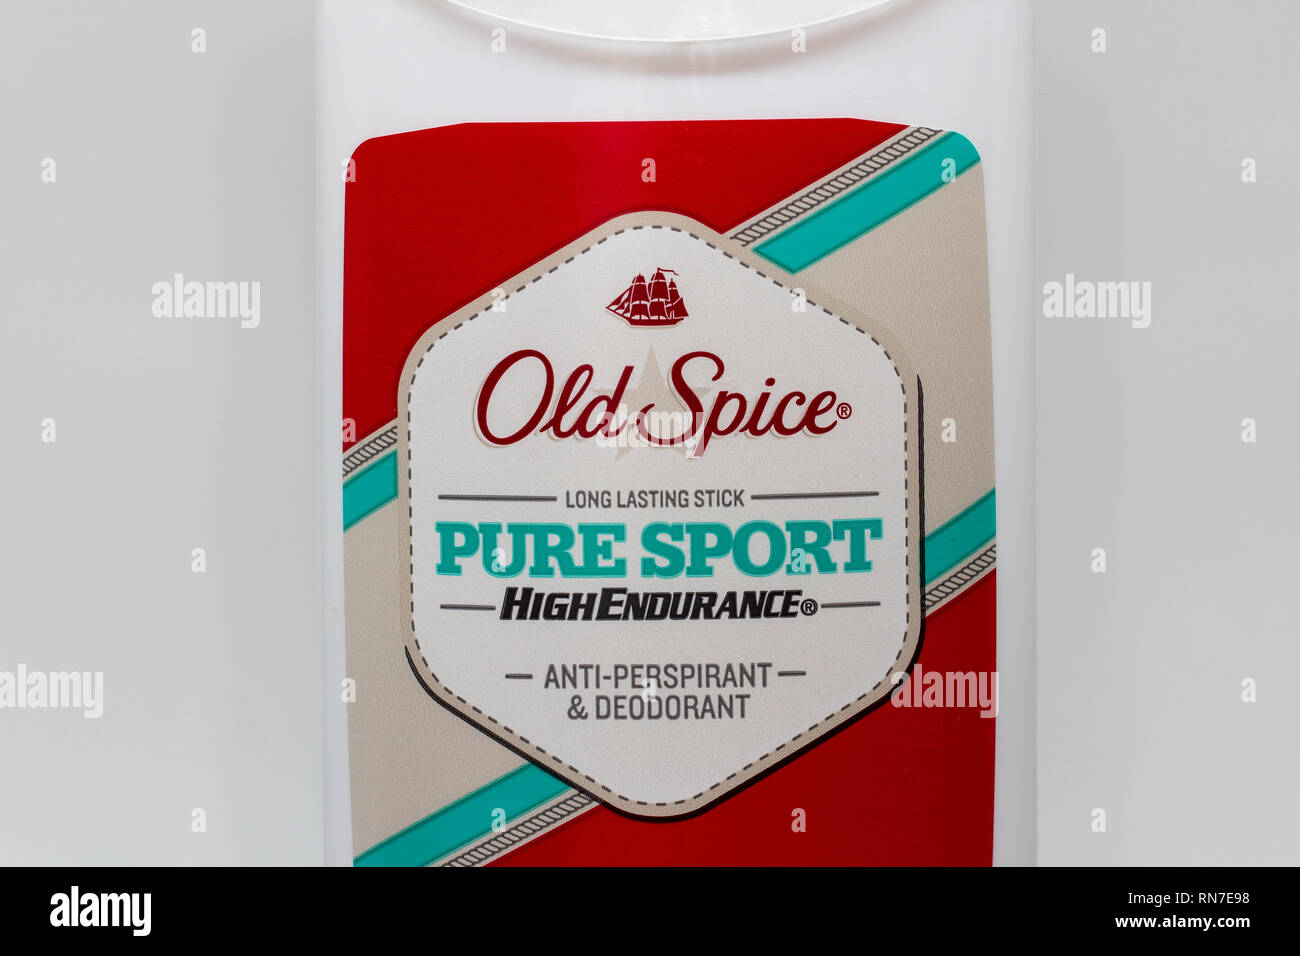 ST. PAUL, MN/USA - FEBRUARY 17, 2019:  Old Spice deodorant and trademark logo. Old Spice is a brand of male grooming products manufactured by Procter  Stock Photo